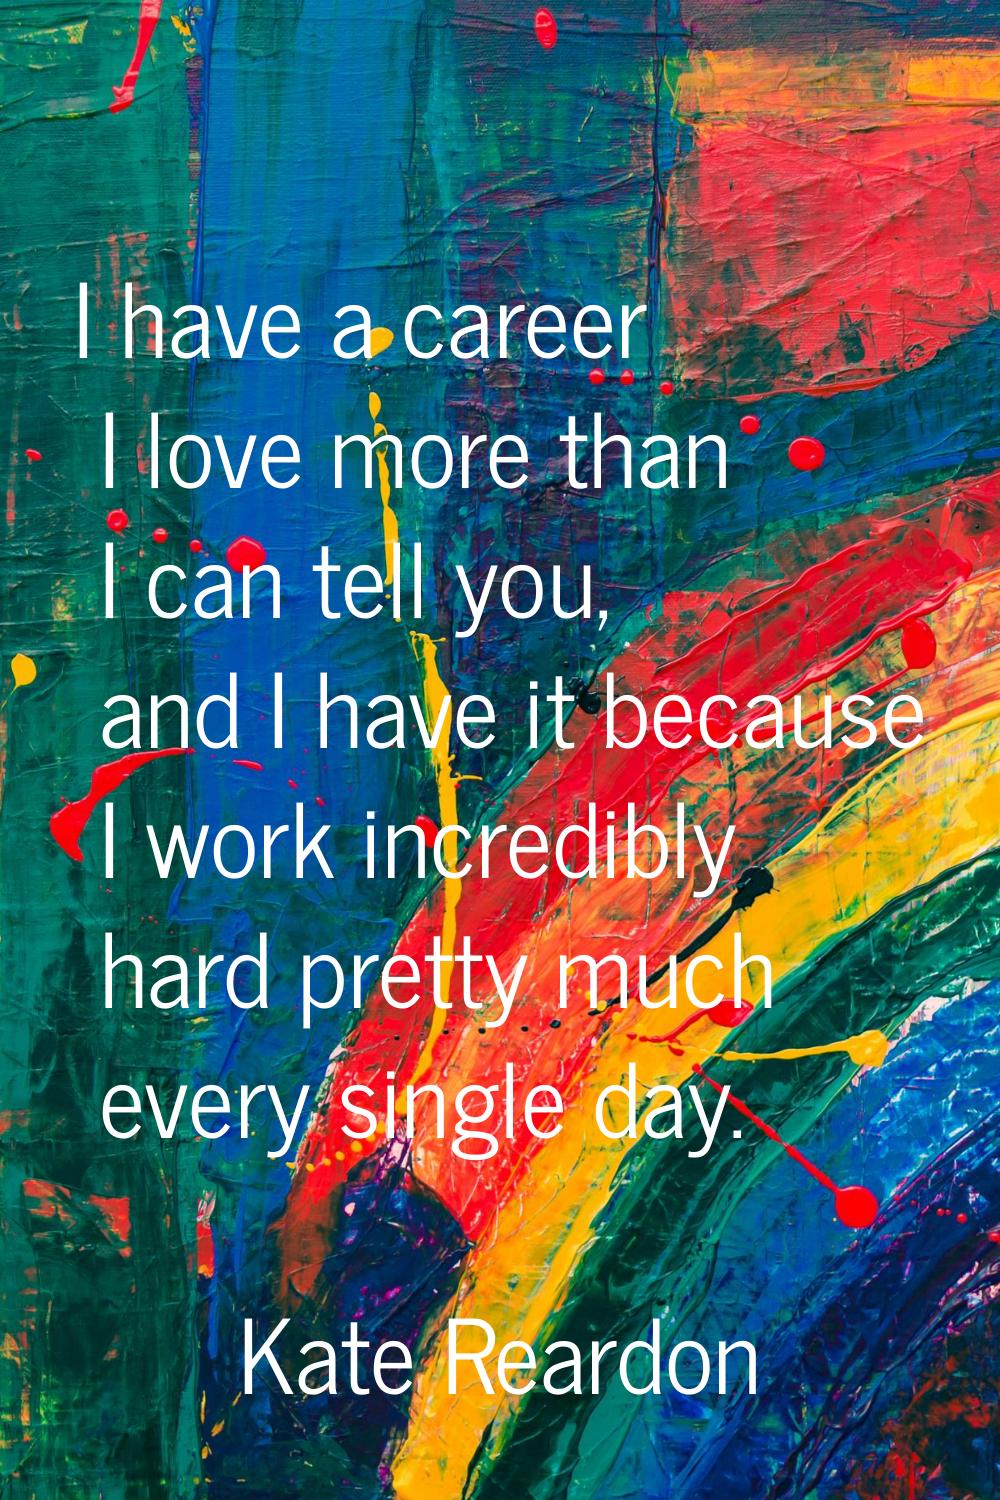 I have a career I love more than I can tell you, and I have it because I work incredibly hard prett